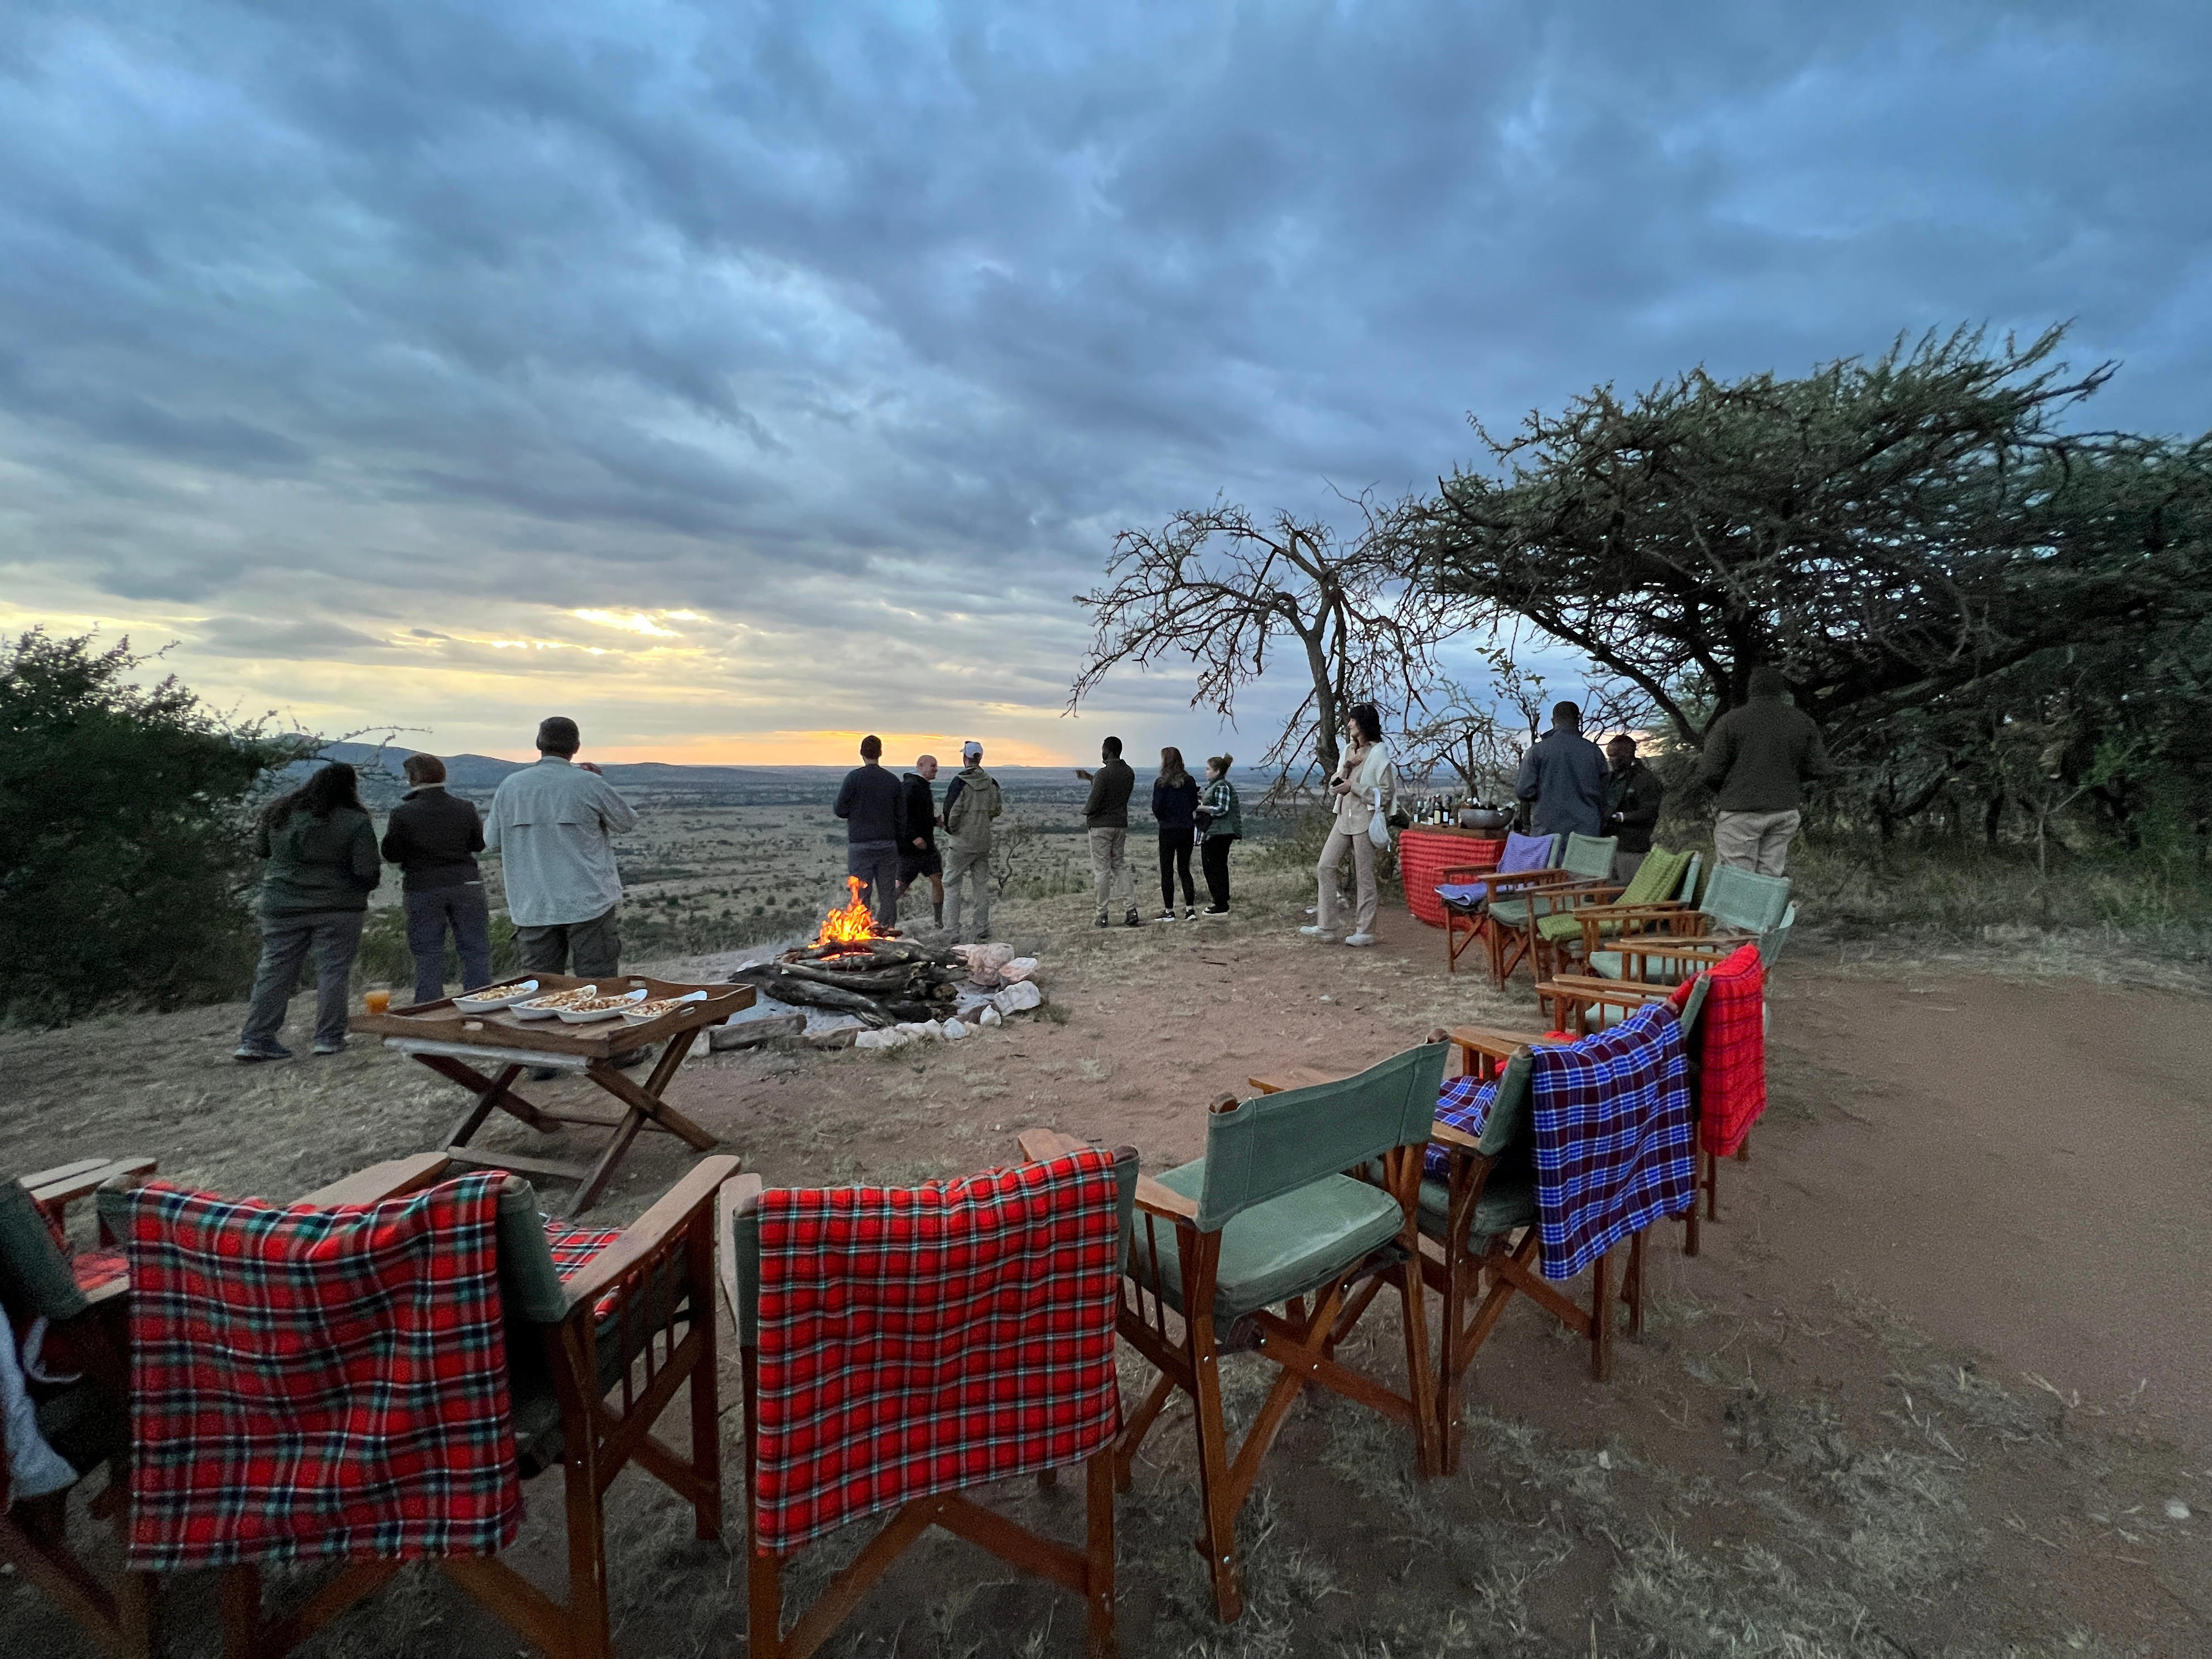 <p>Other activities that were part of our add-on package included a visit to a Maasai village in Kenya and a special happy hour and barbecue dinner.</p><p>And, for our journey home, the travel agency took care of everything, including transfers, until we boarded our international flight.</p>